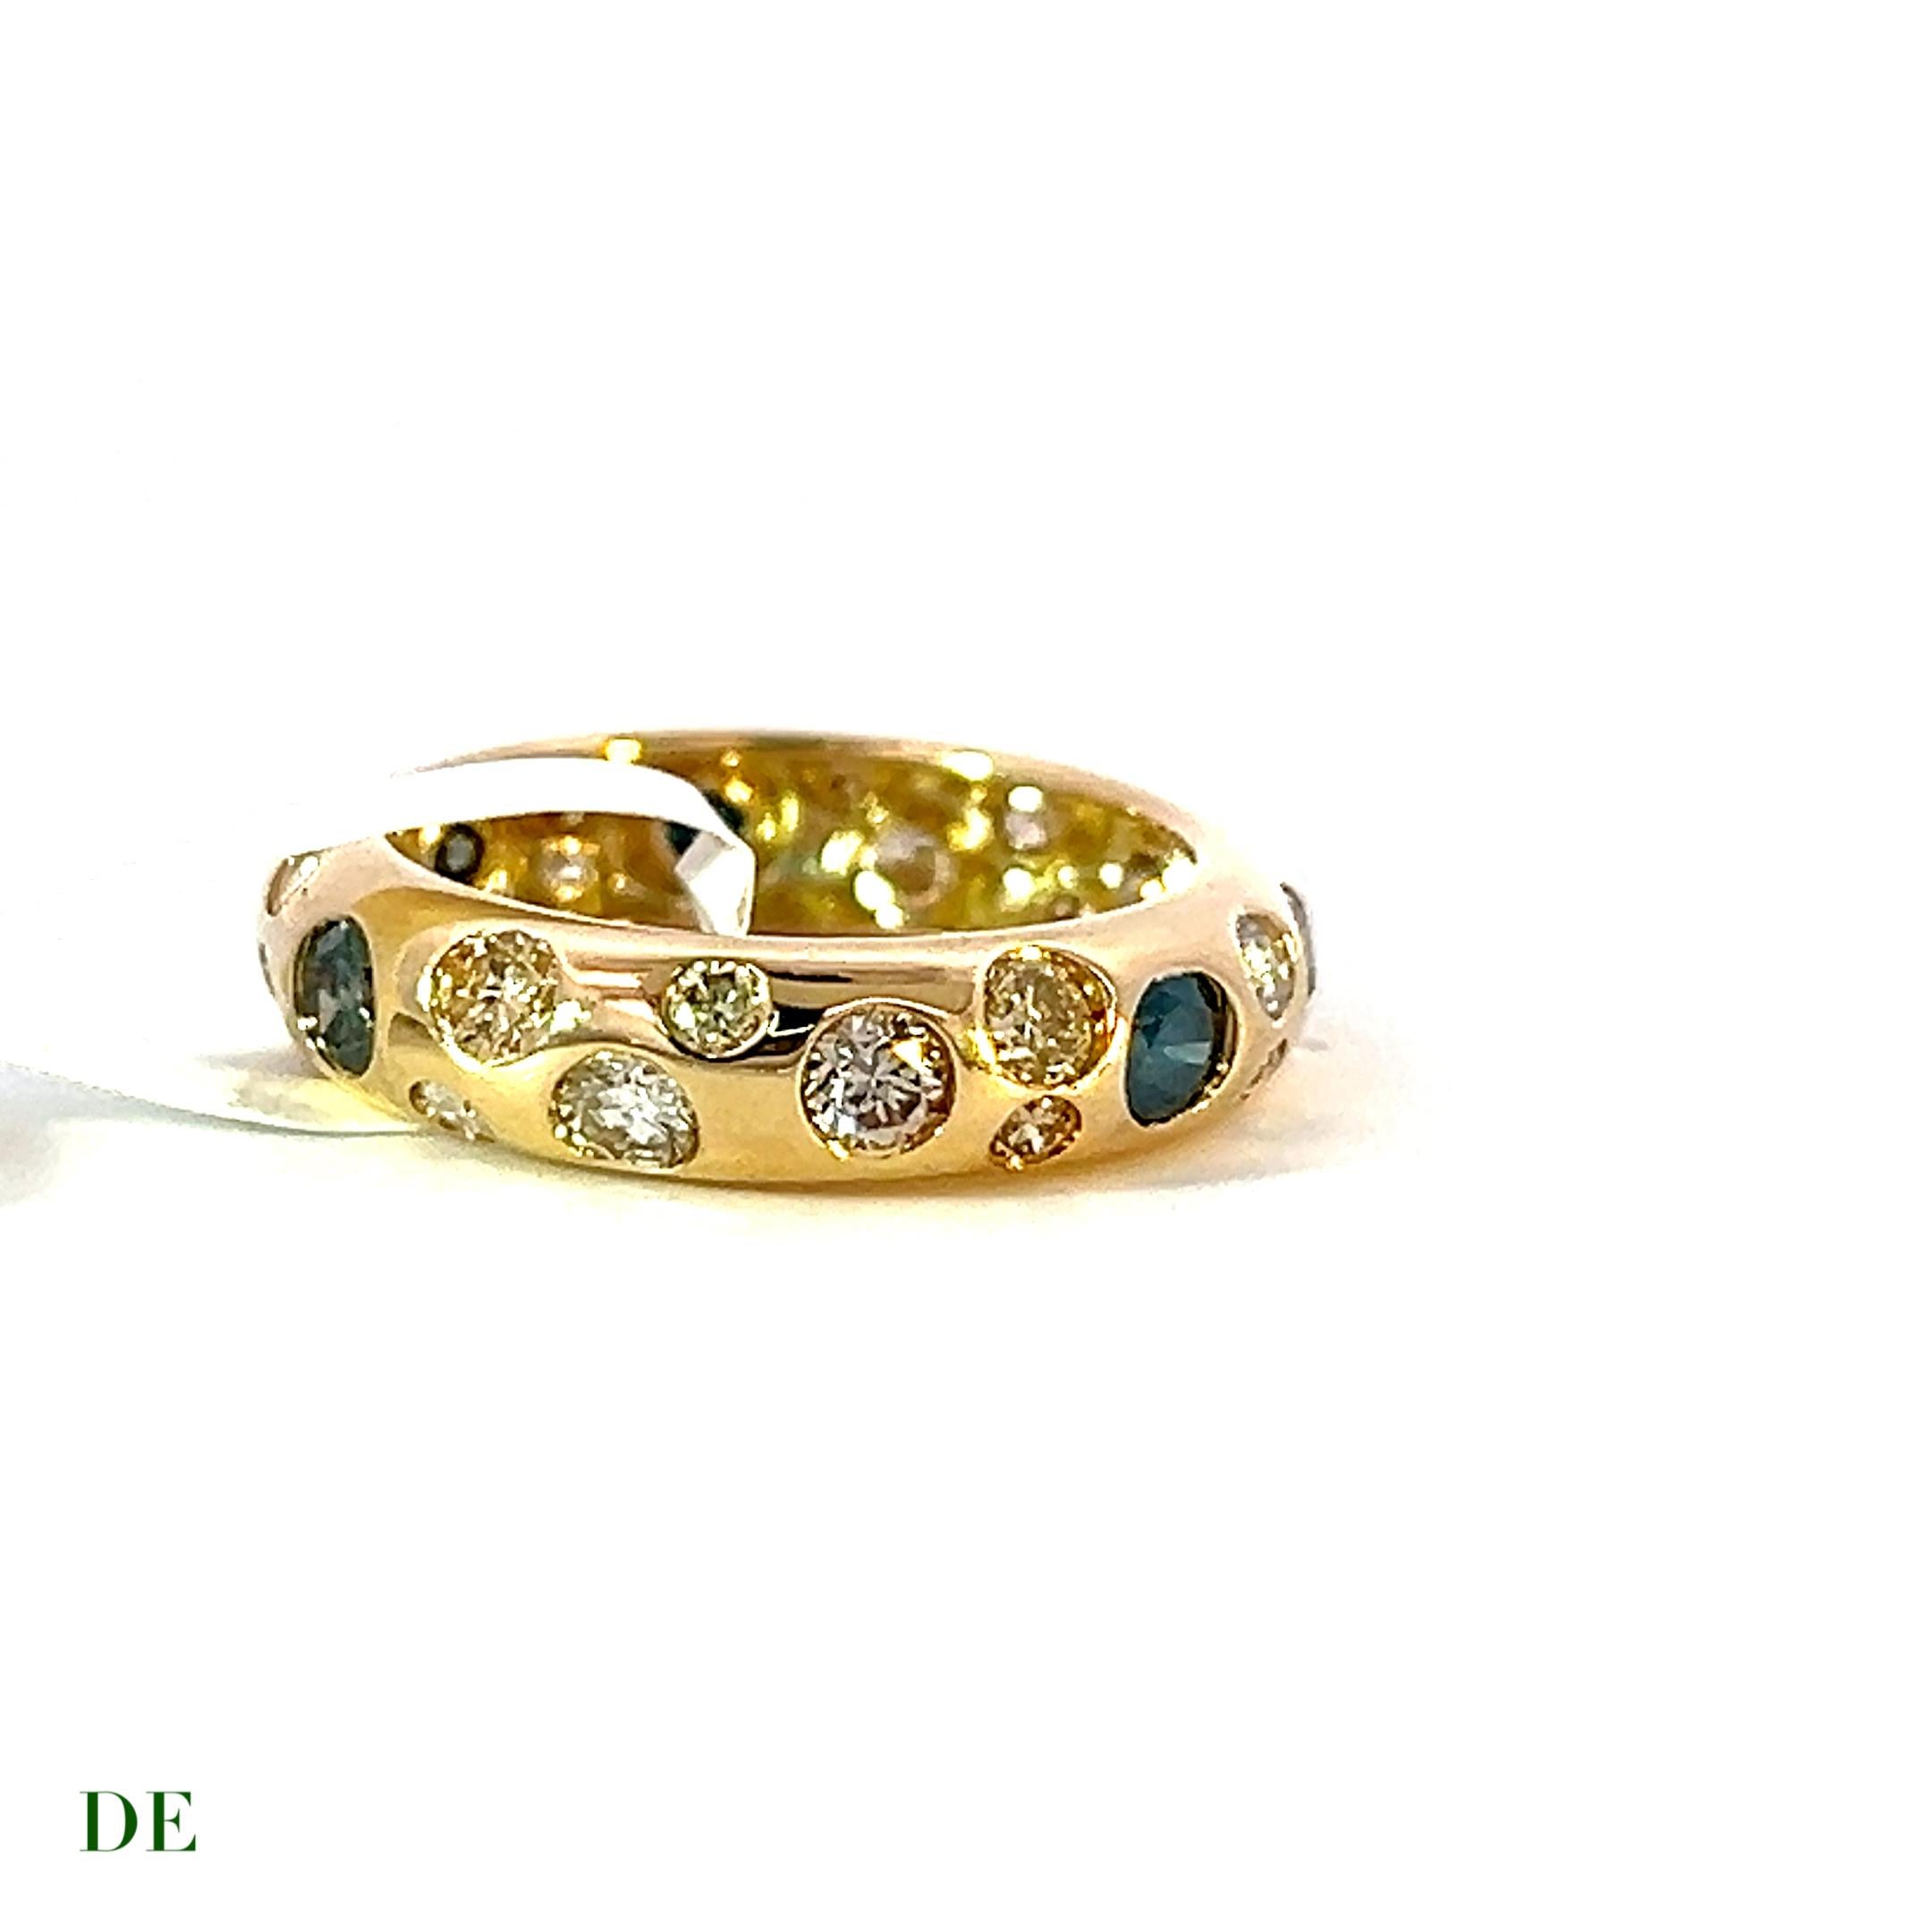 Exclusive 14k Yellow Gold 1.92 Carat Polkadot Fancy Color Diamond Band Ring

Introducing the exclusive Exclusive 14k Yellow Gold Polkadot Fancy Color Diamond Band Ring, a truly extraordinary piece that combines opulence and individuality. This